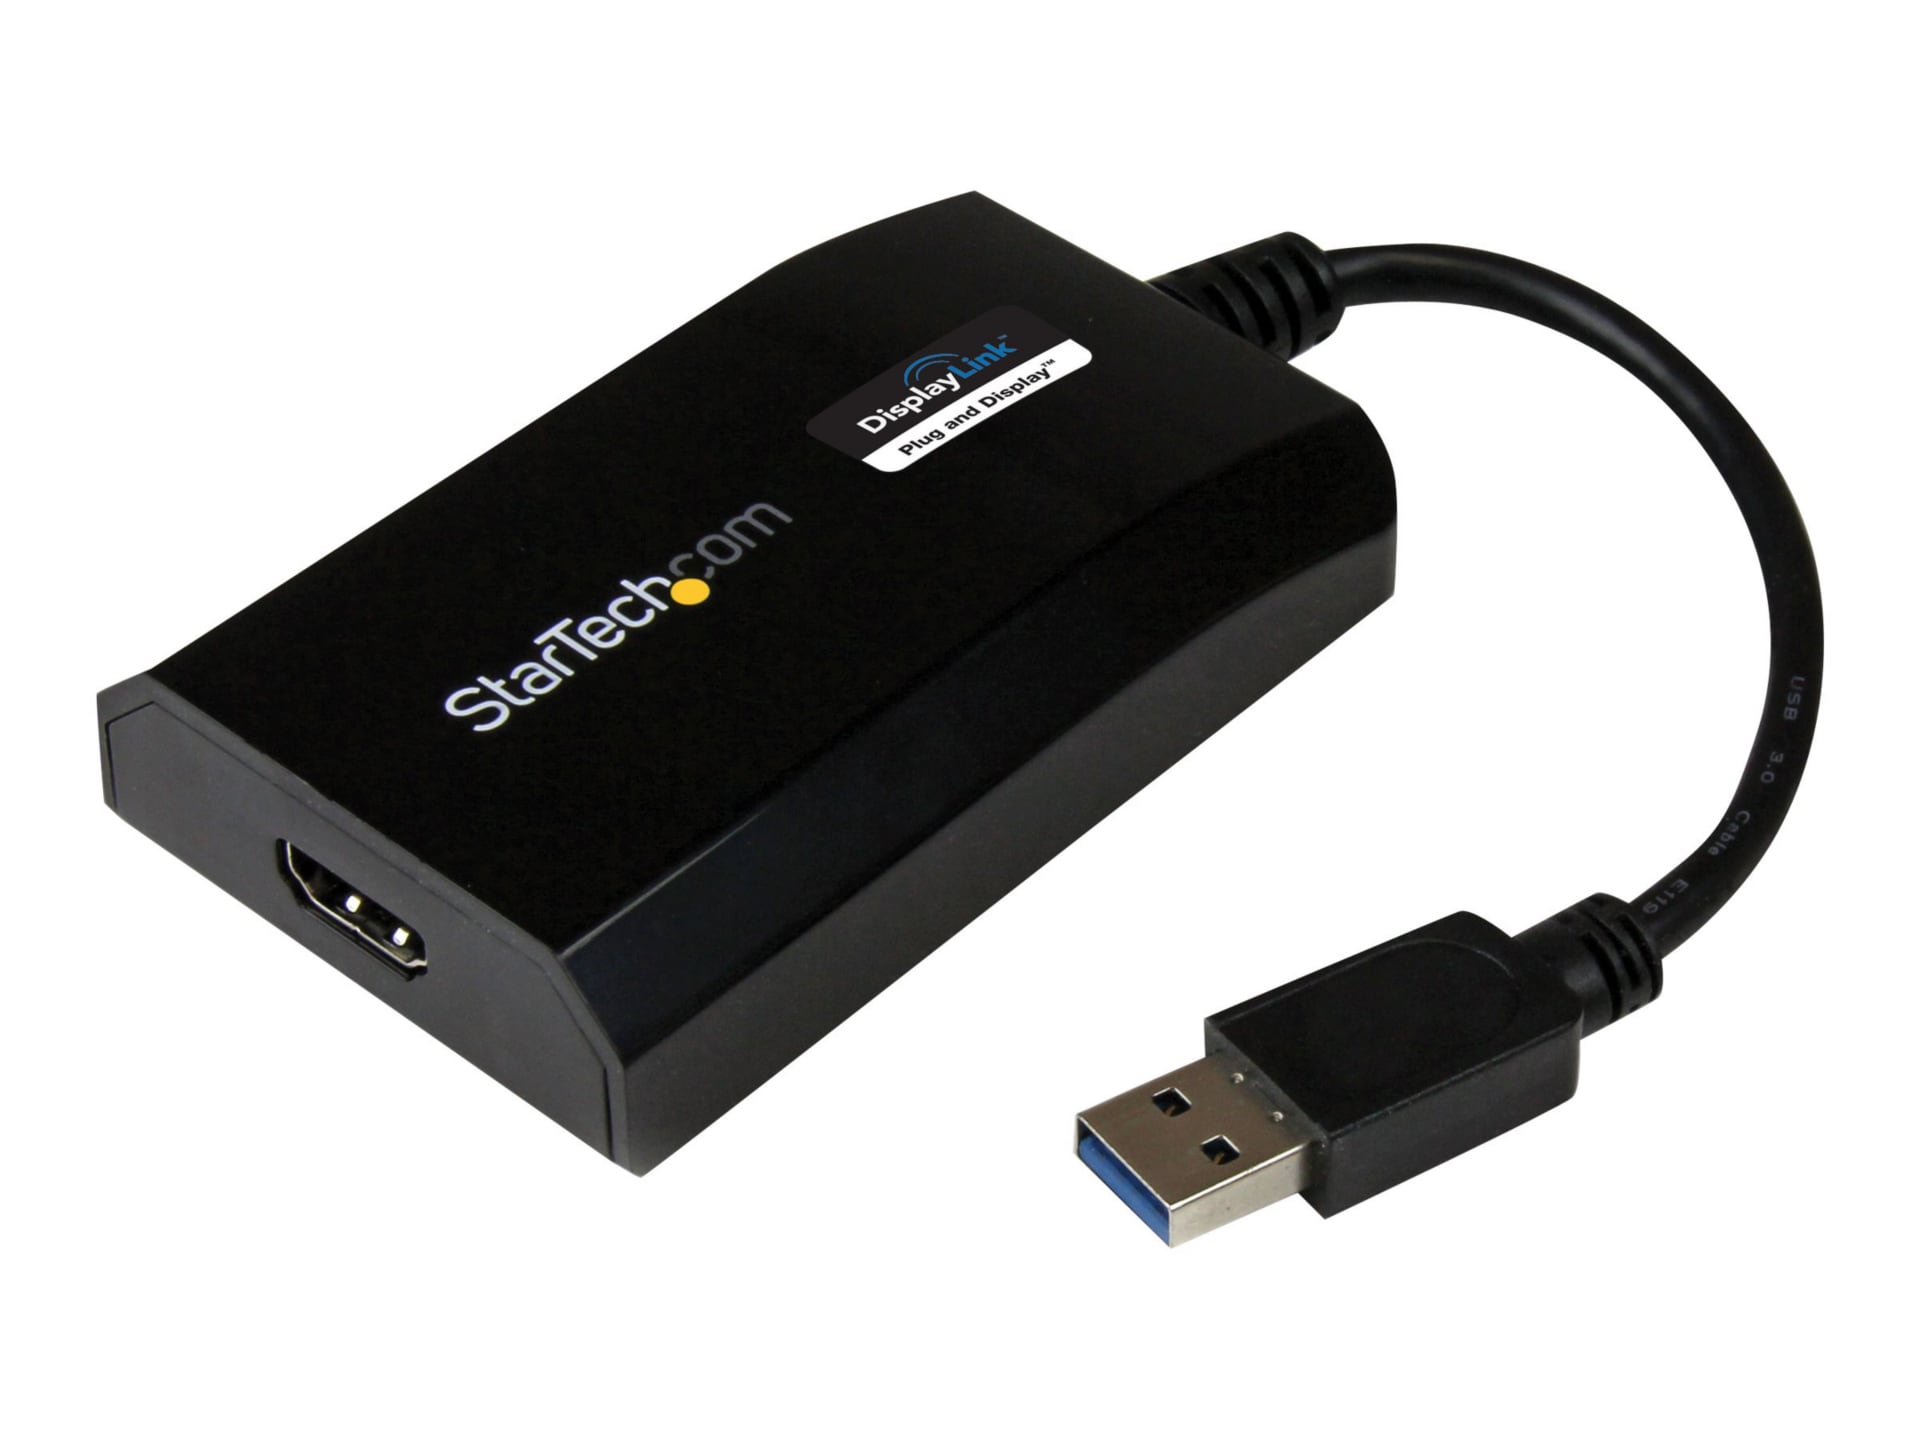 StarTech.com USB 3.0 to HDMI Adapter, DisplayLink Certified, 1920x1200, USB-A to HDMI Display Adapter, External Graphics